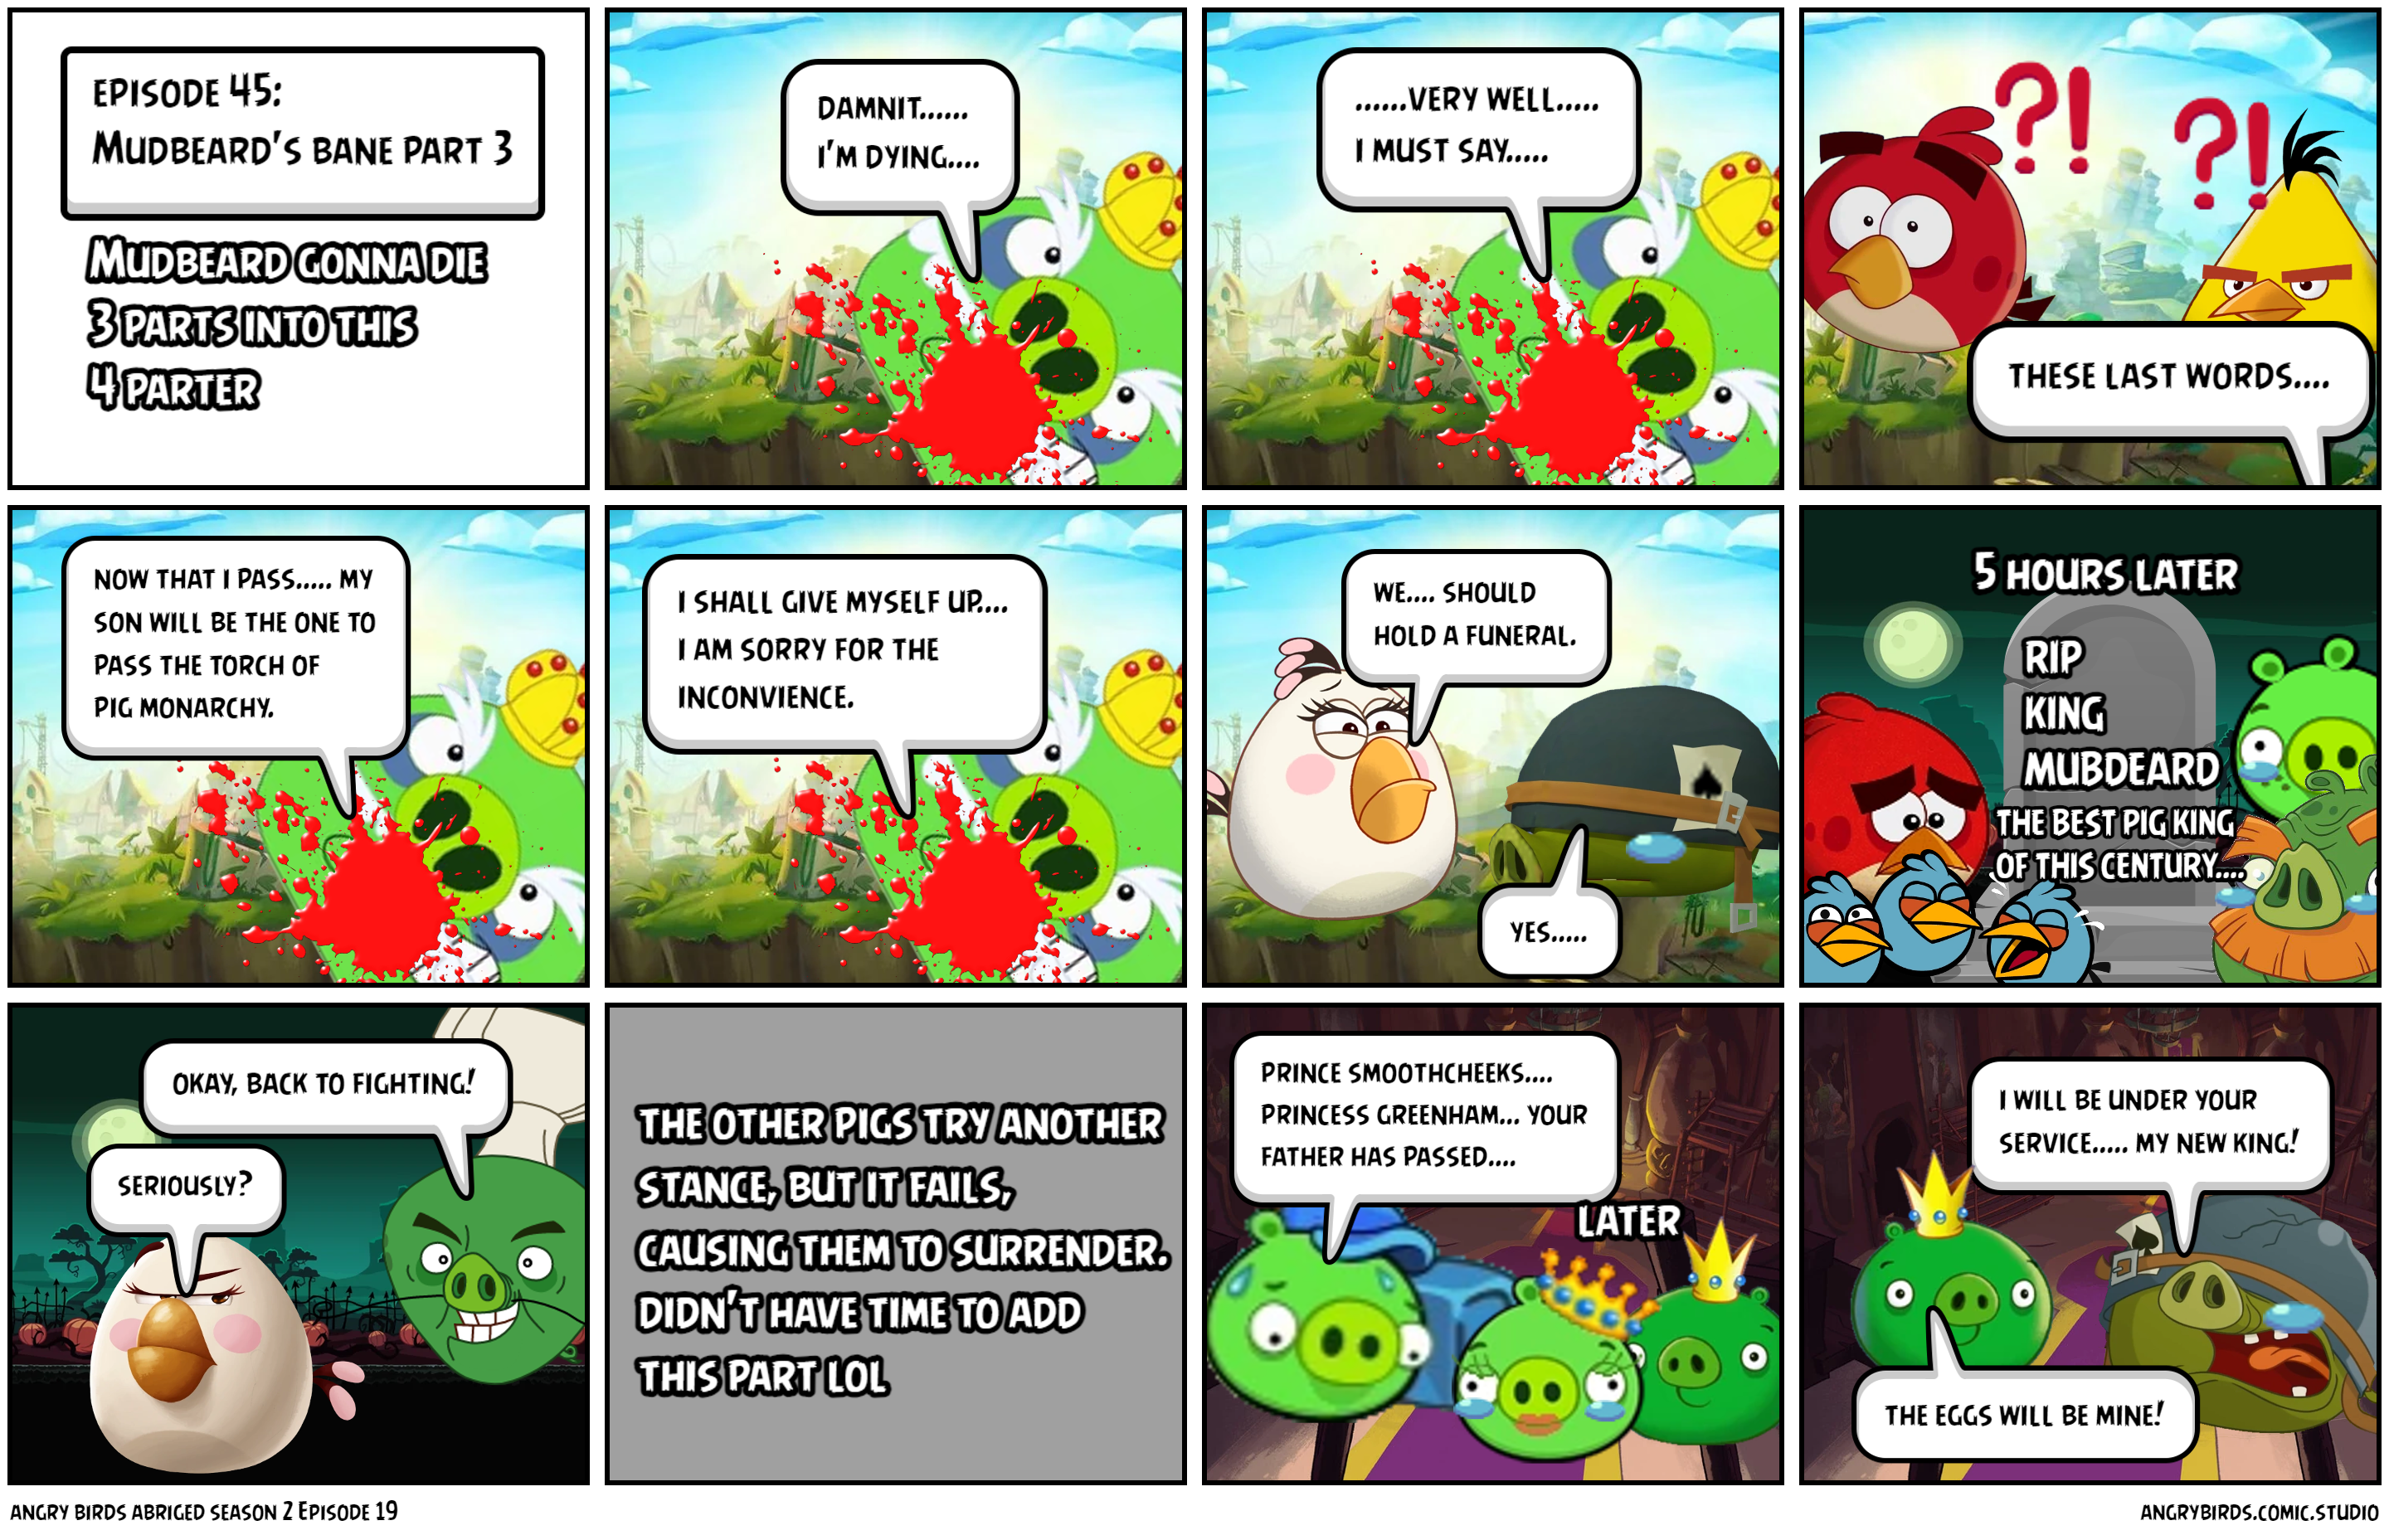 angry birds abriged season 2 Episode 19